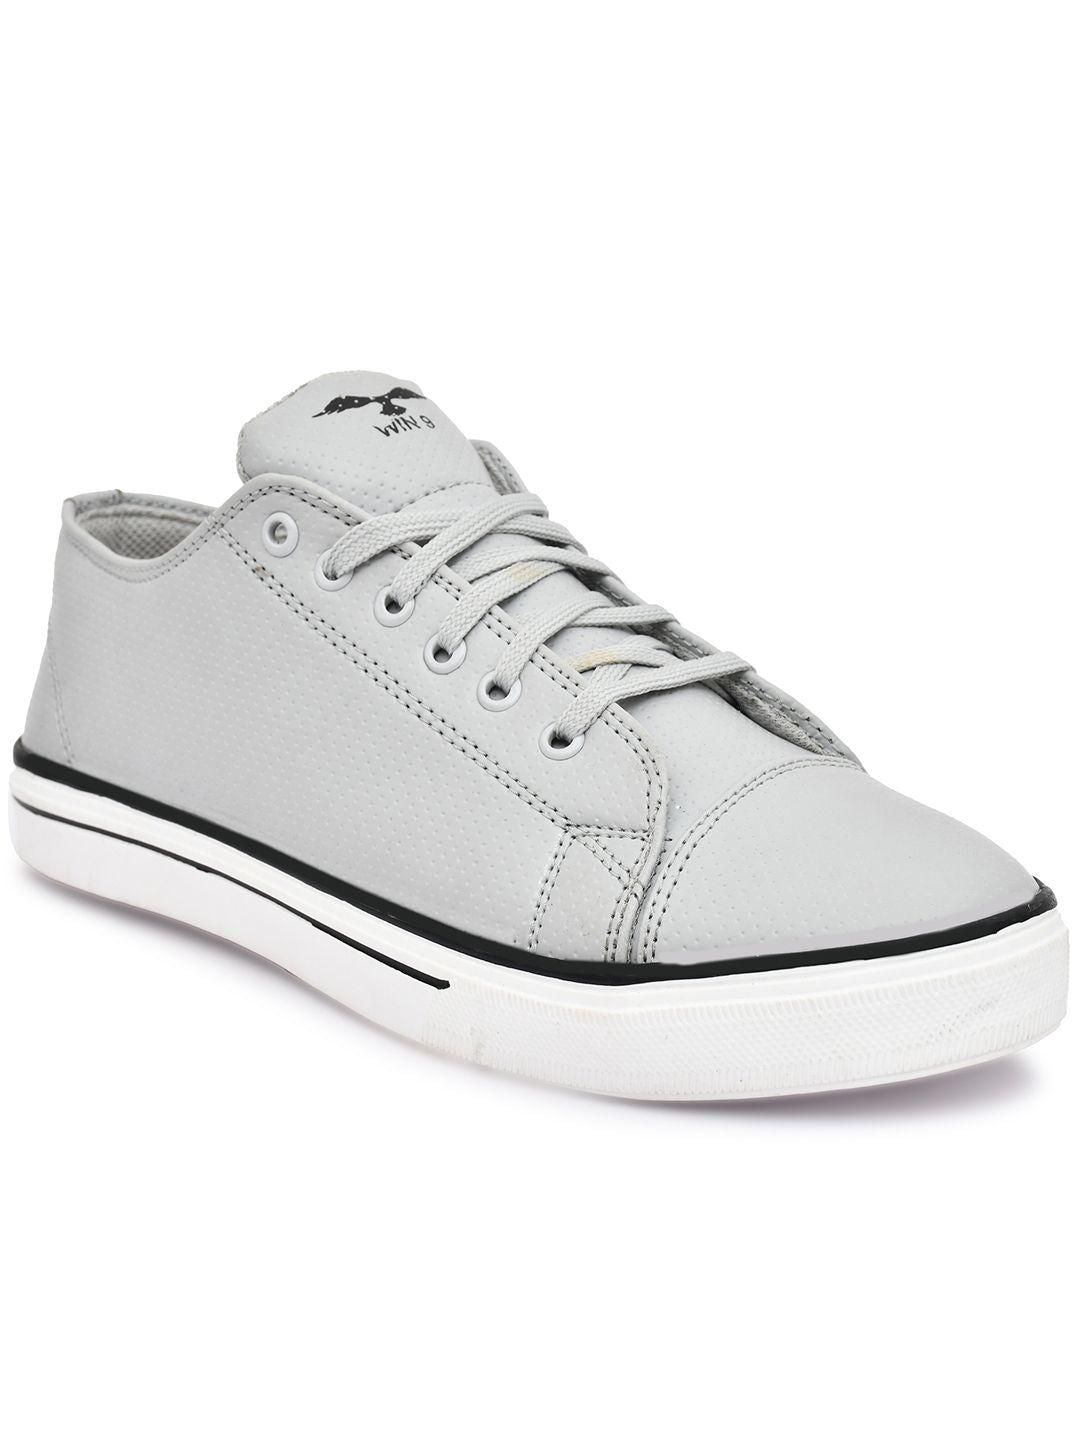 WIN9 casual sneaker comfortable grey shoes for men